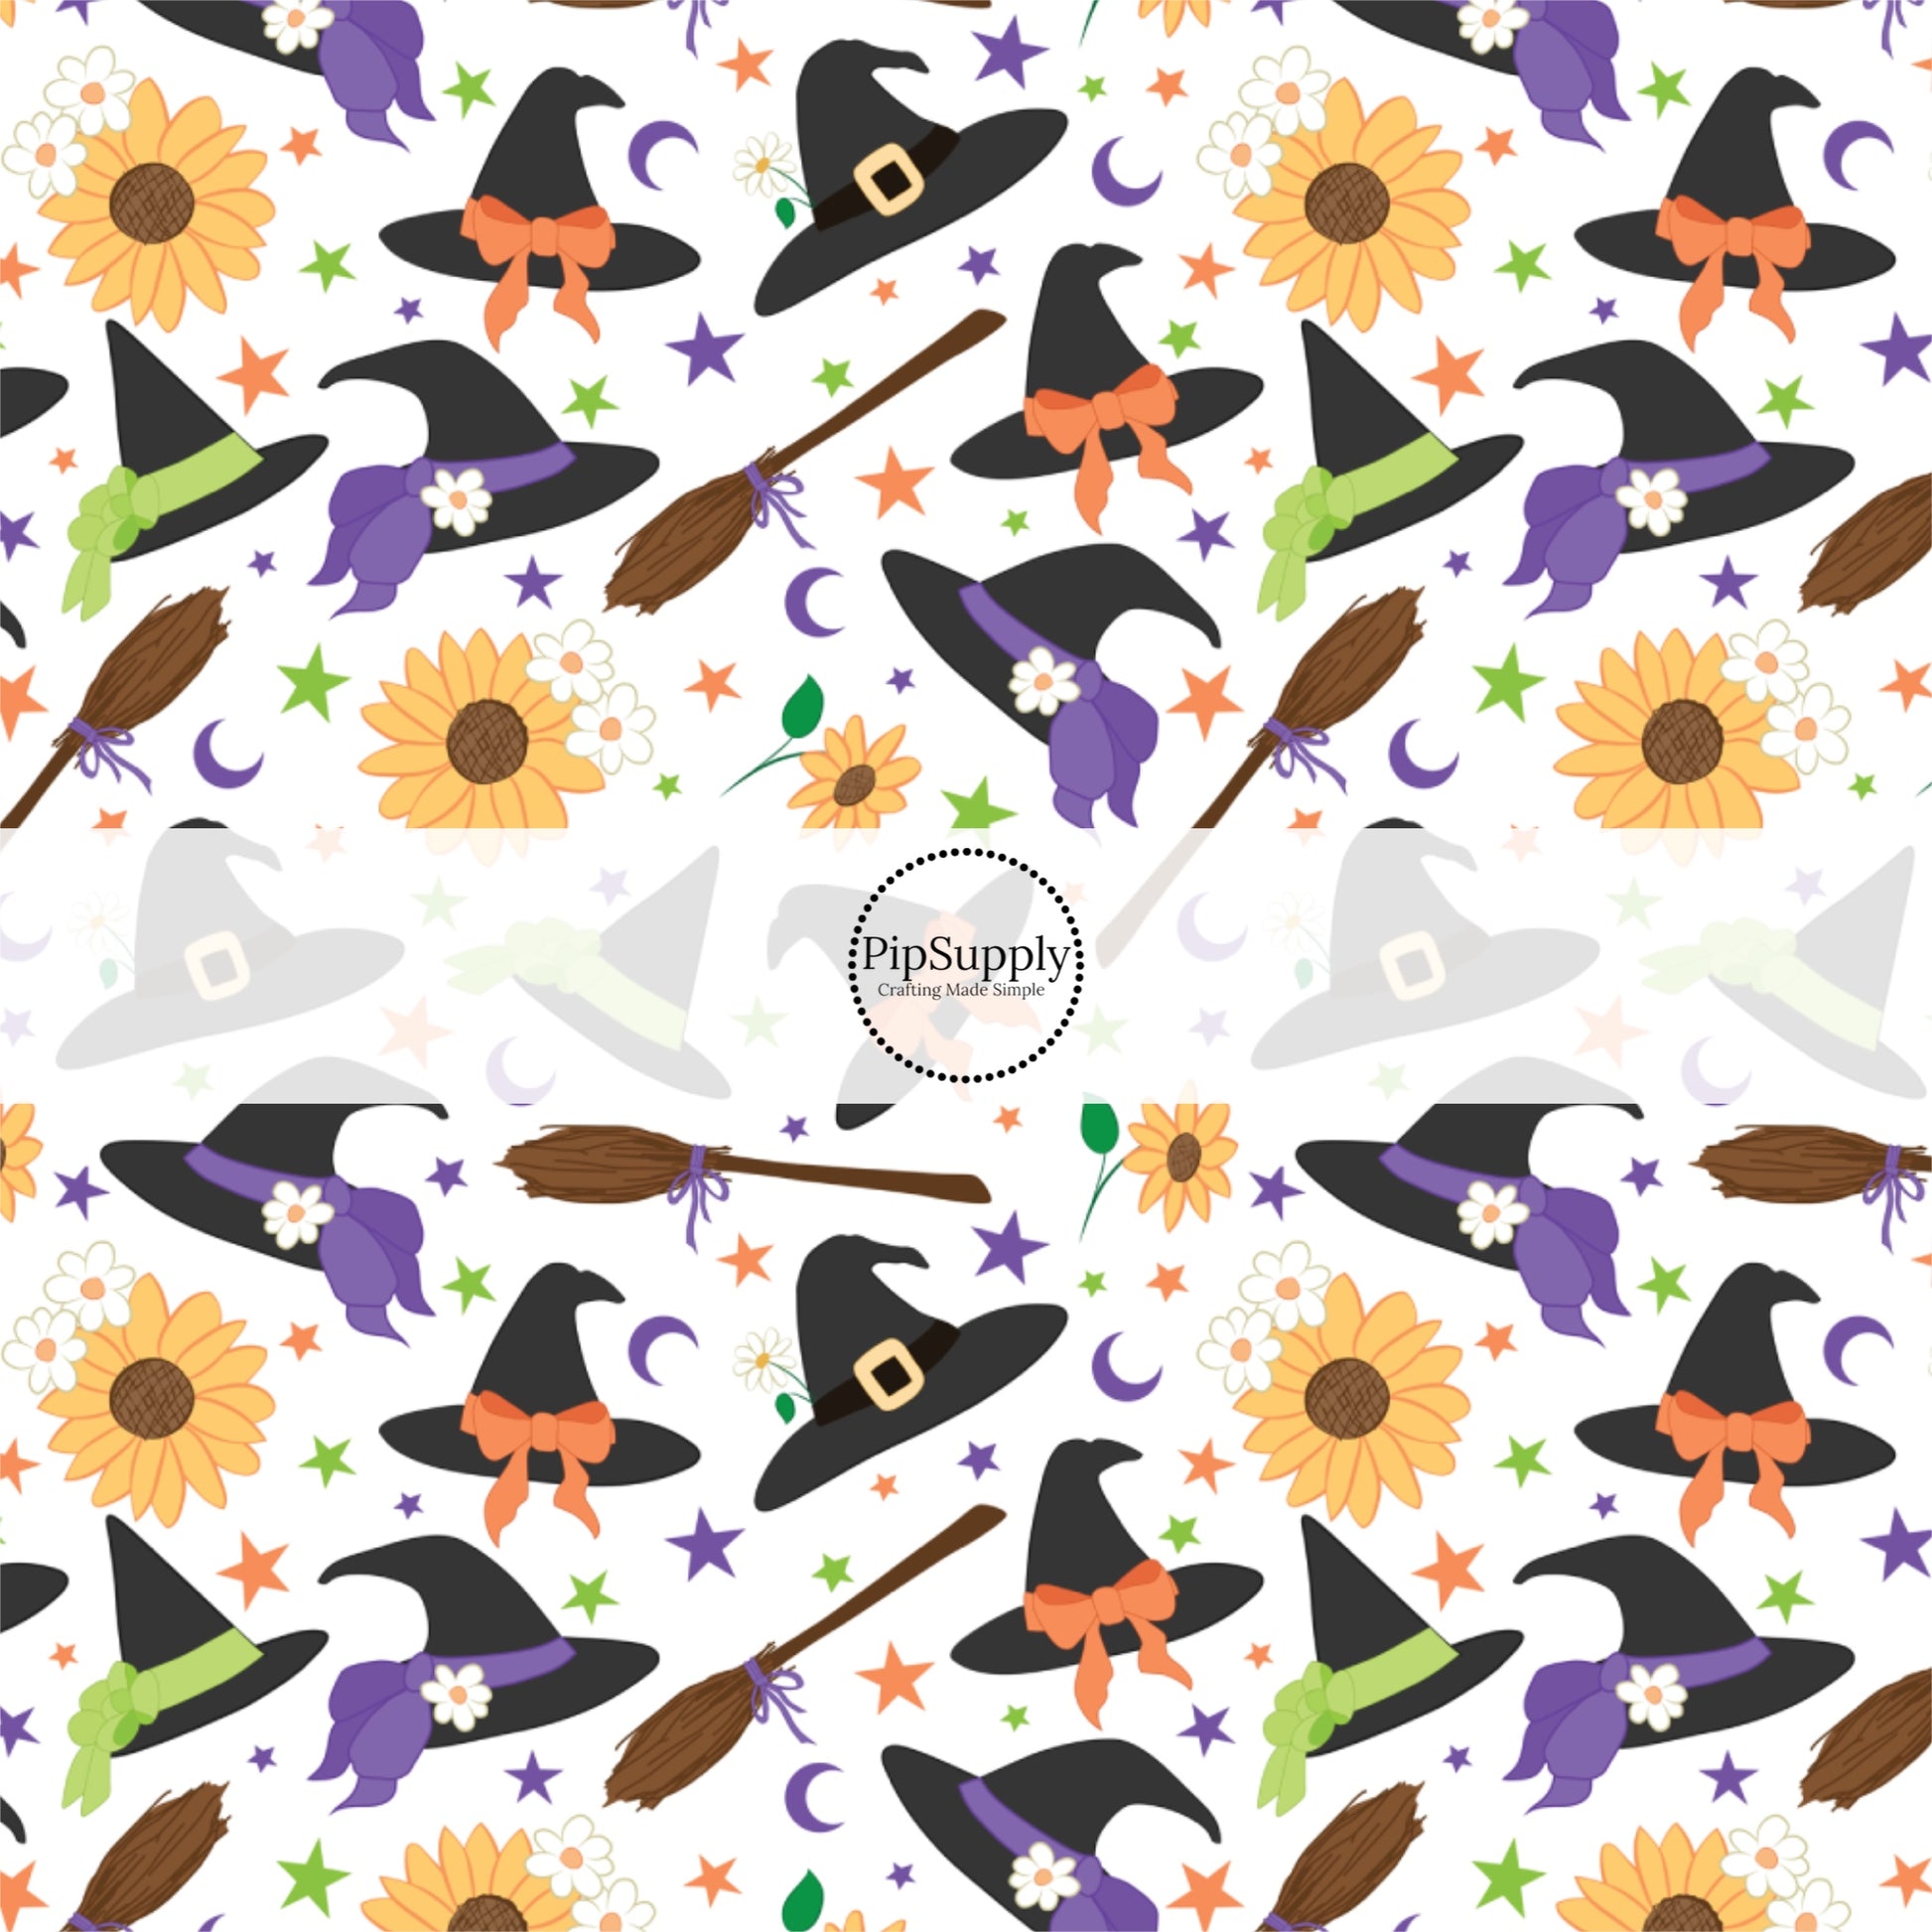 These Halloween themed cream fabric by the yard features witches, hats, brooms, sunflowers, small daisies, and small colorful stars on cream. This fun spooky themed fabric can be used for all your sewing and crafting needs! 